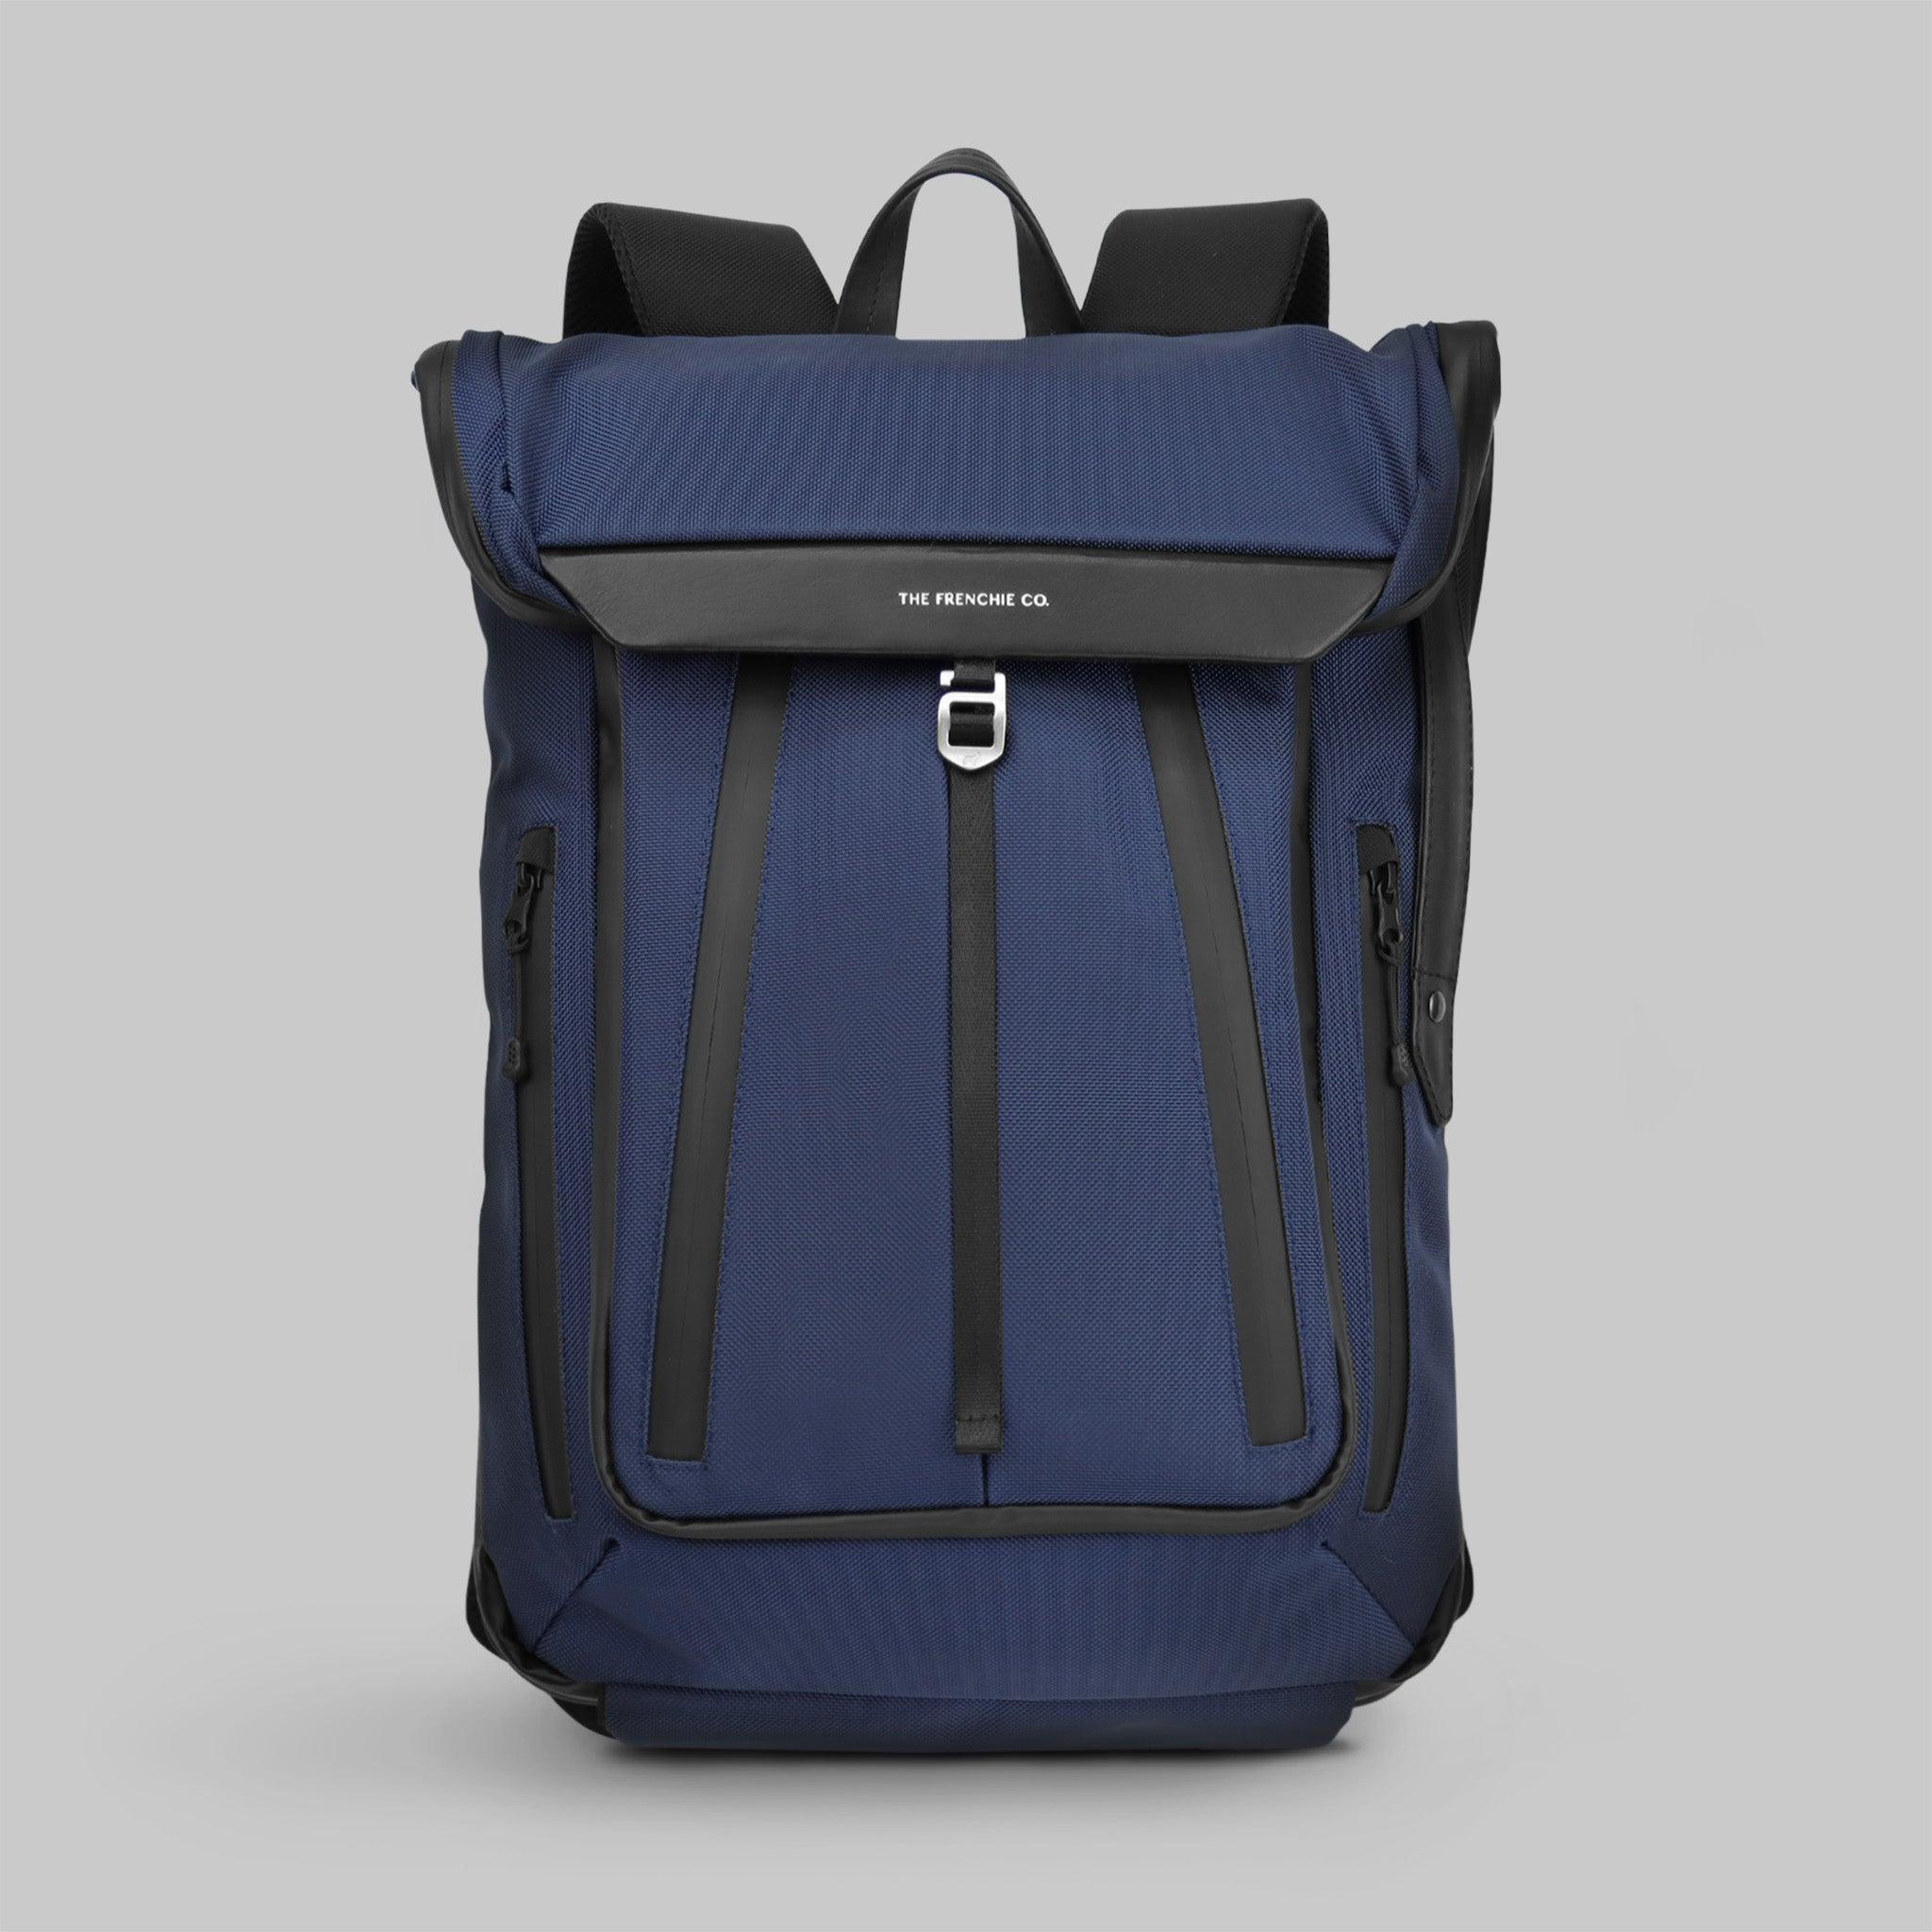 WORK/TRAVEL SPEED BACKPACK - The Frenchie Co.